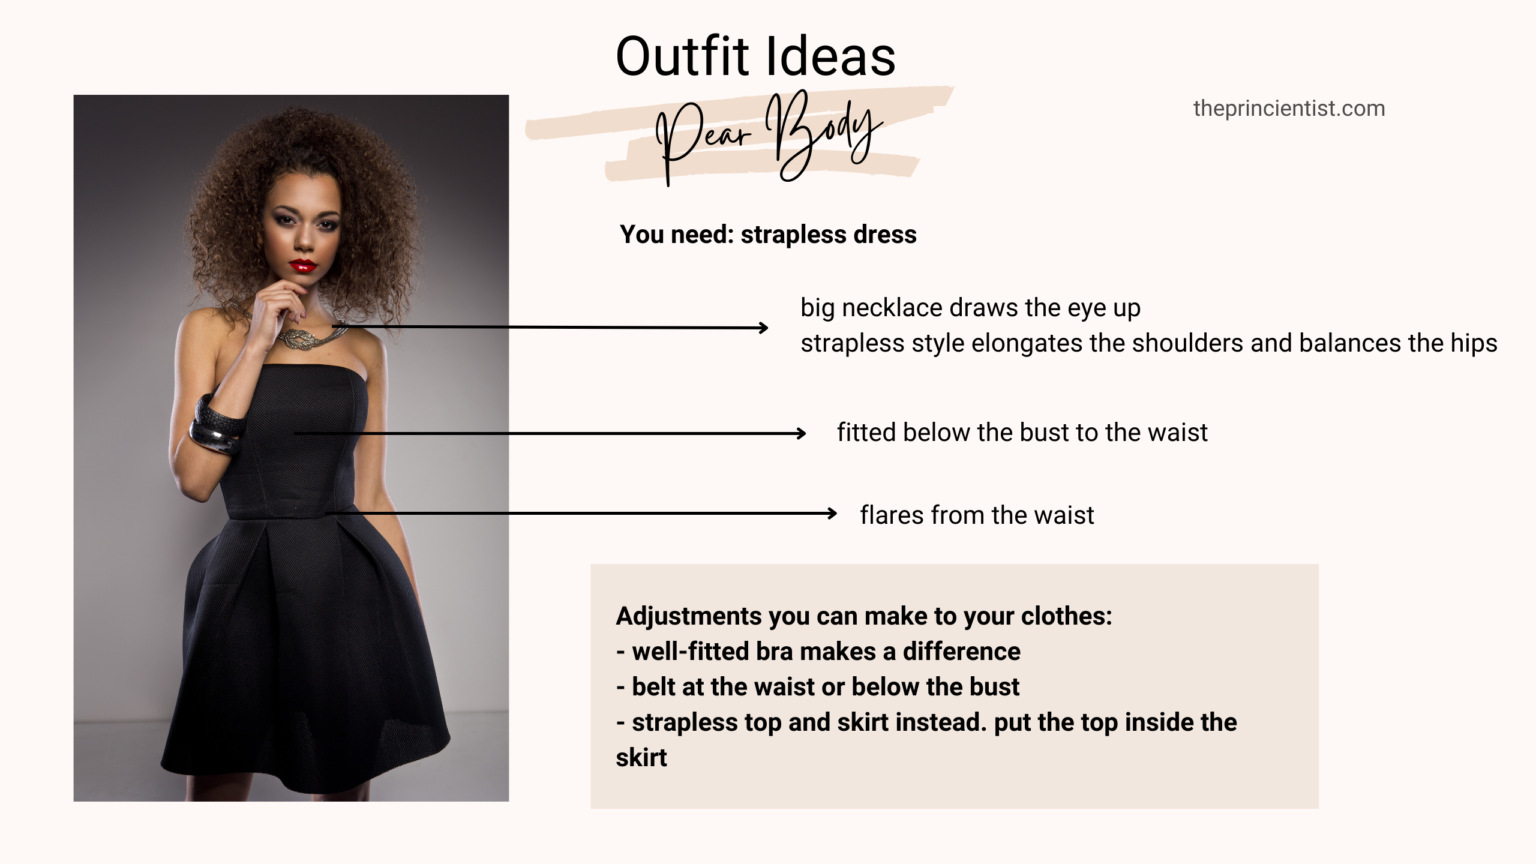 how to dress the pear shaped body- outfit ideas pear body shape - strapless black dress and instructions to adjust you outfit at home